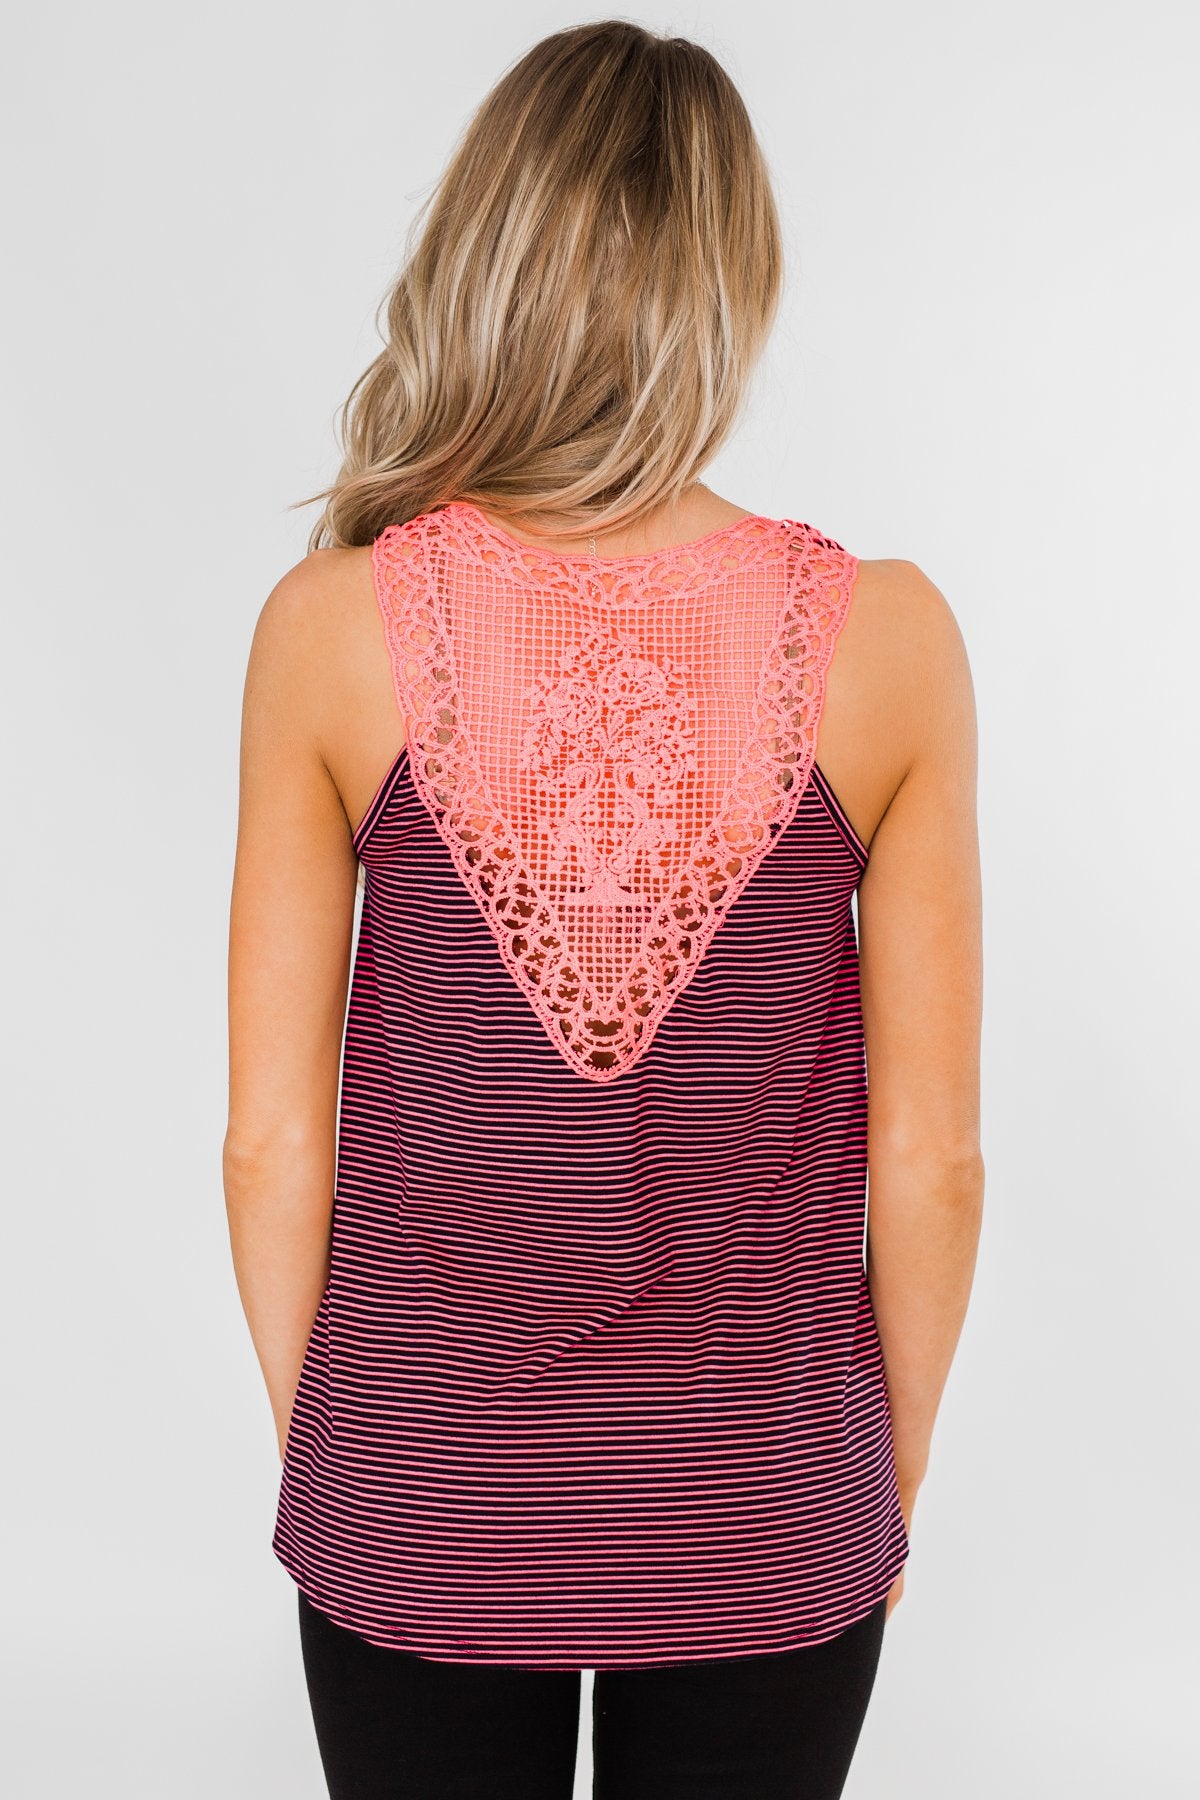 Striped Lace Racerback Tank Top- Neon Pink & Black – The Pulse